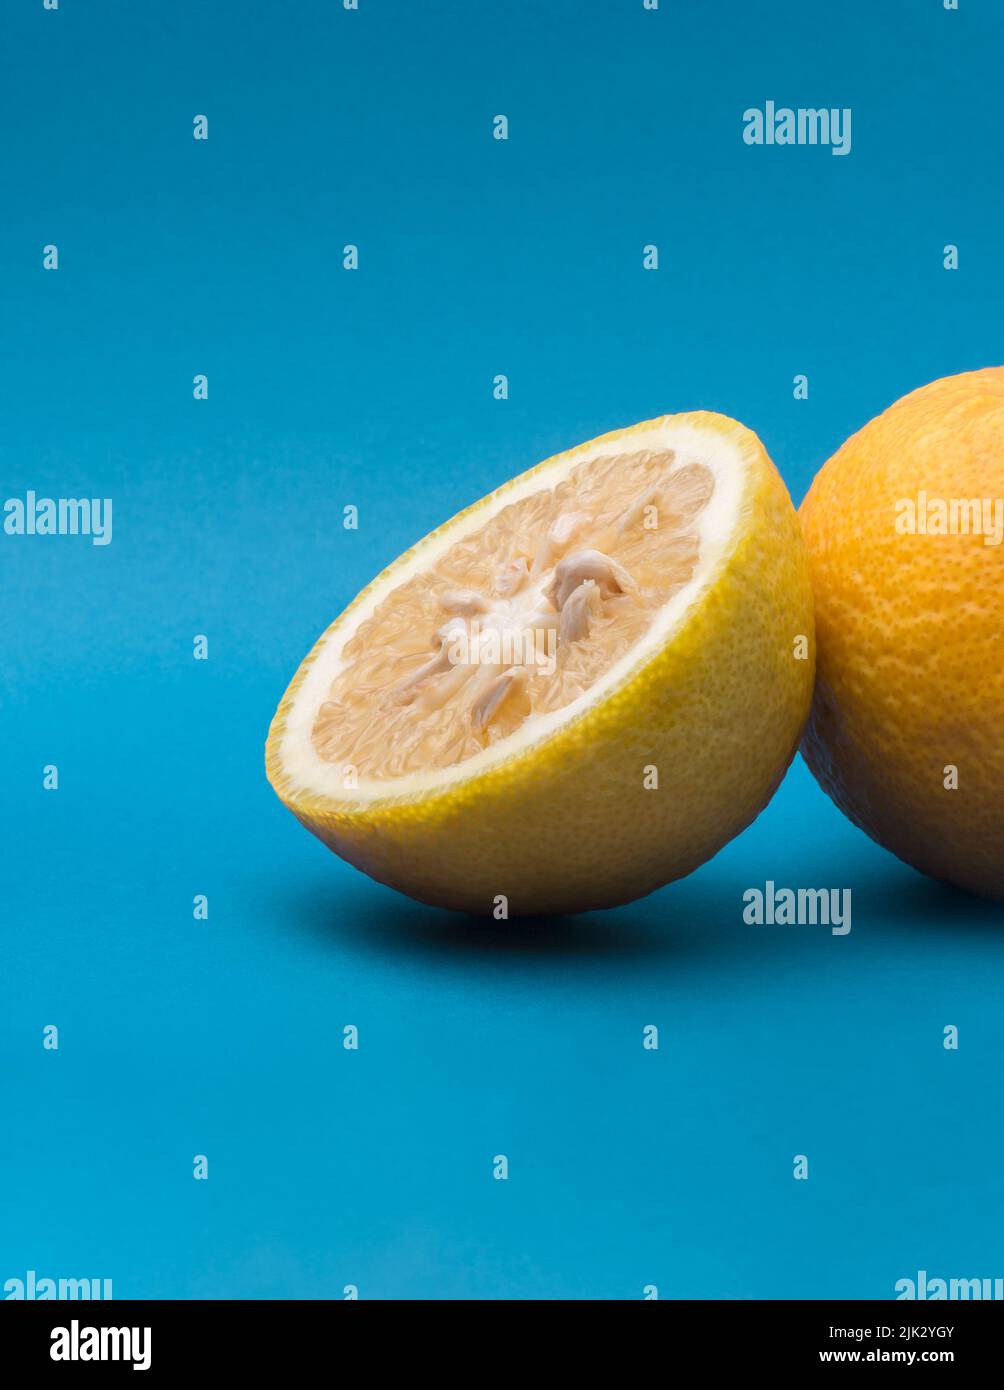 sweet orange fruit slices, isolated on blue background, complementary color theme Stock Photo